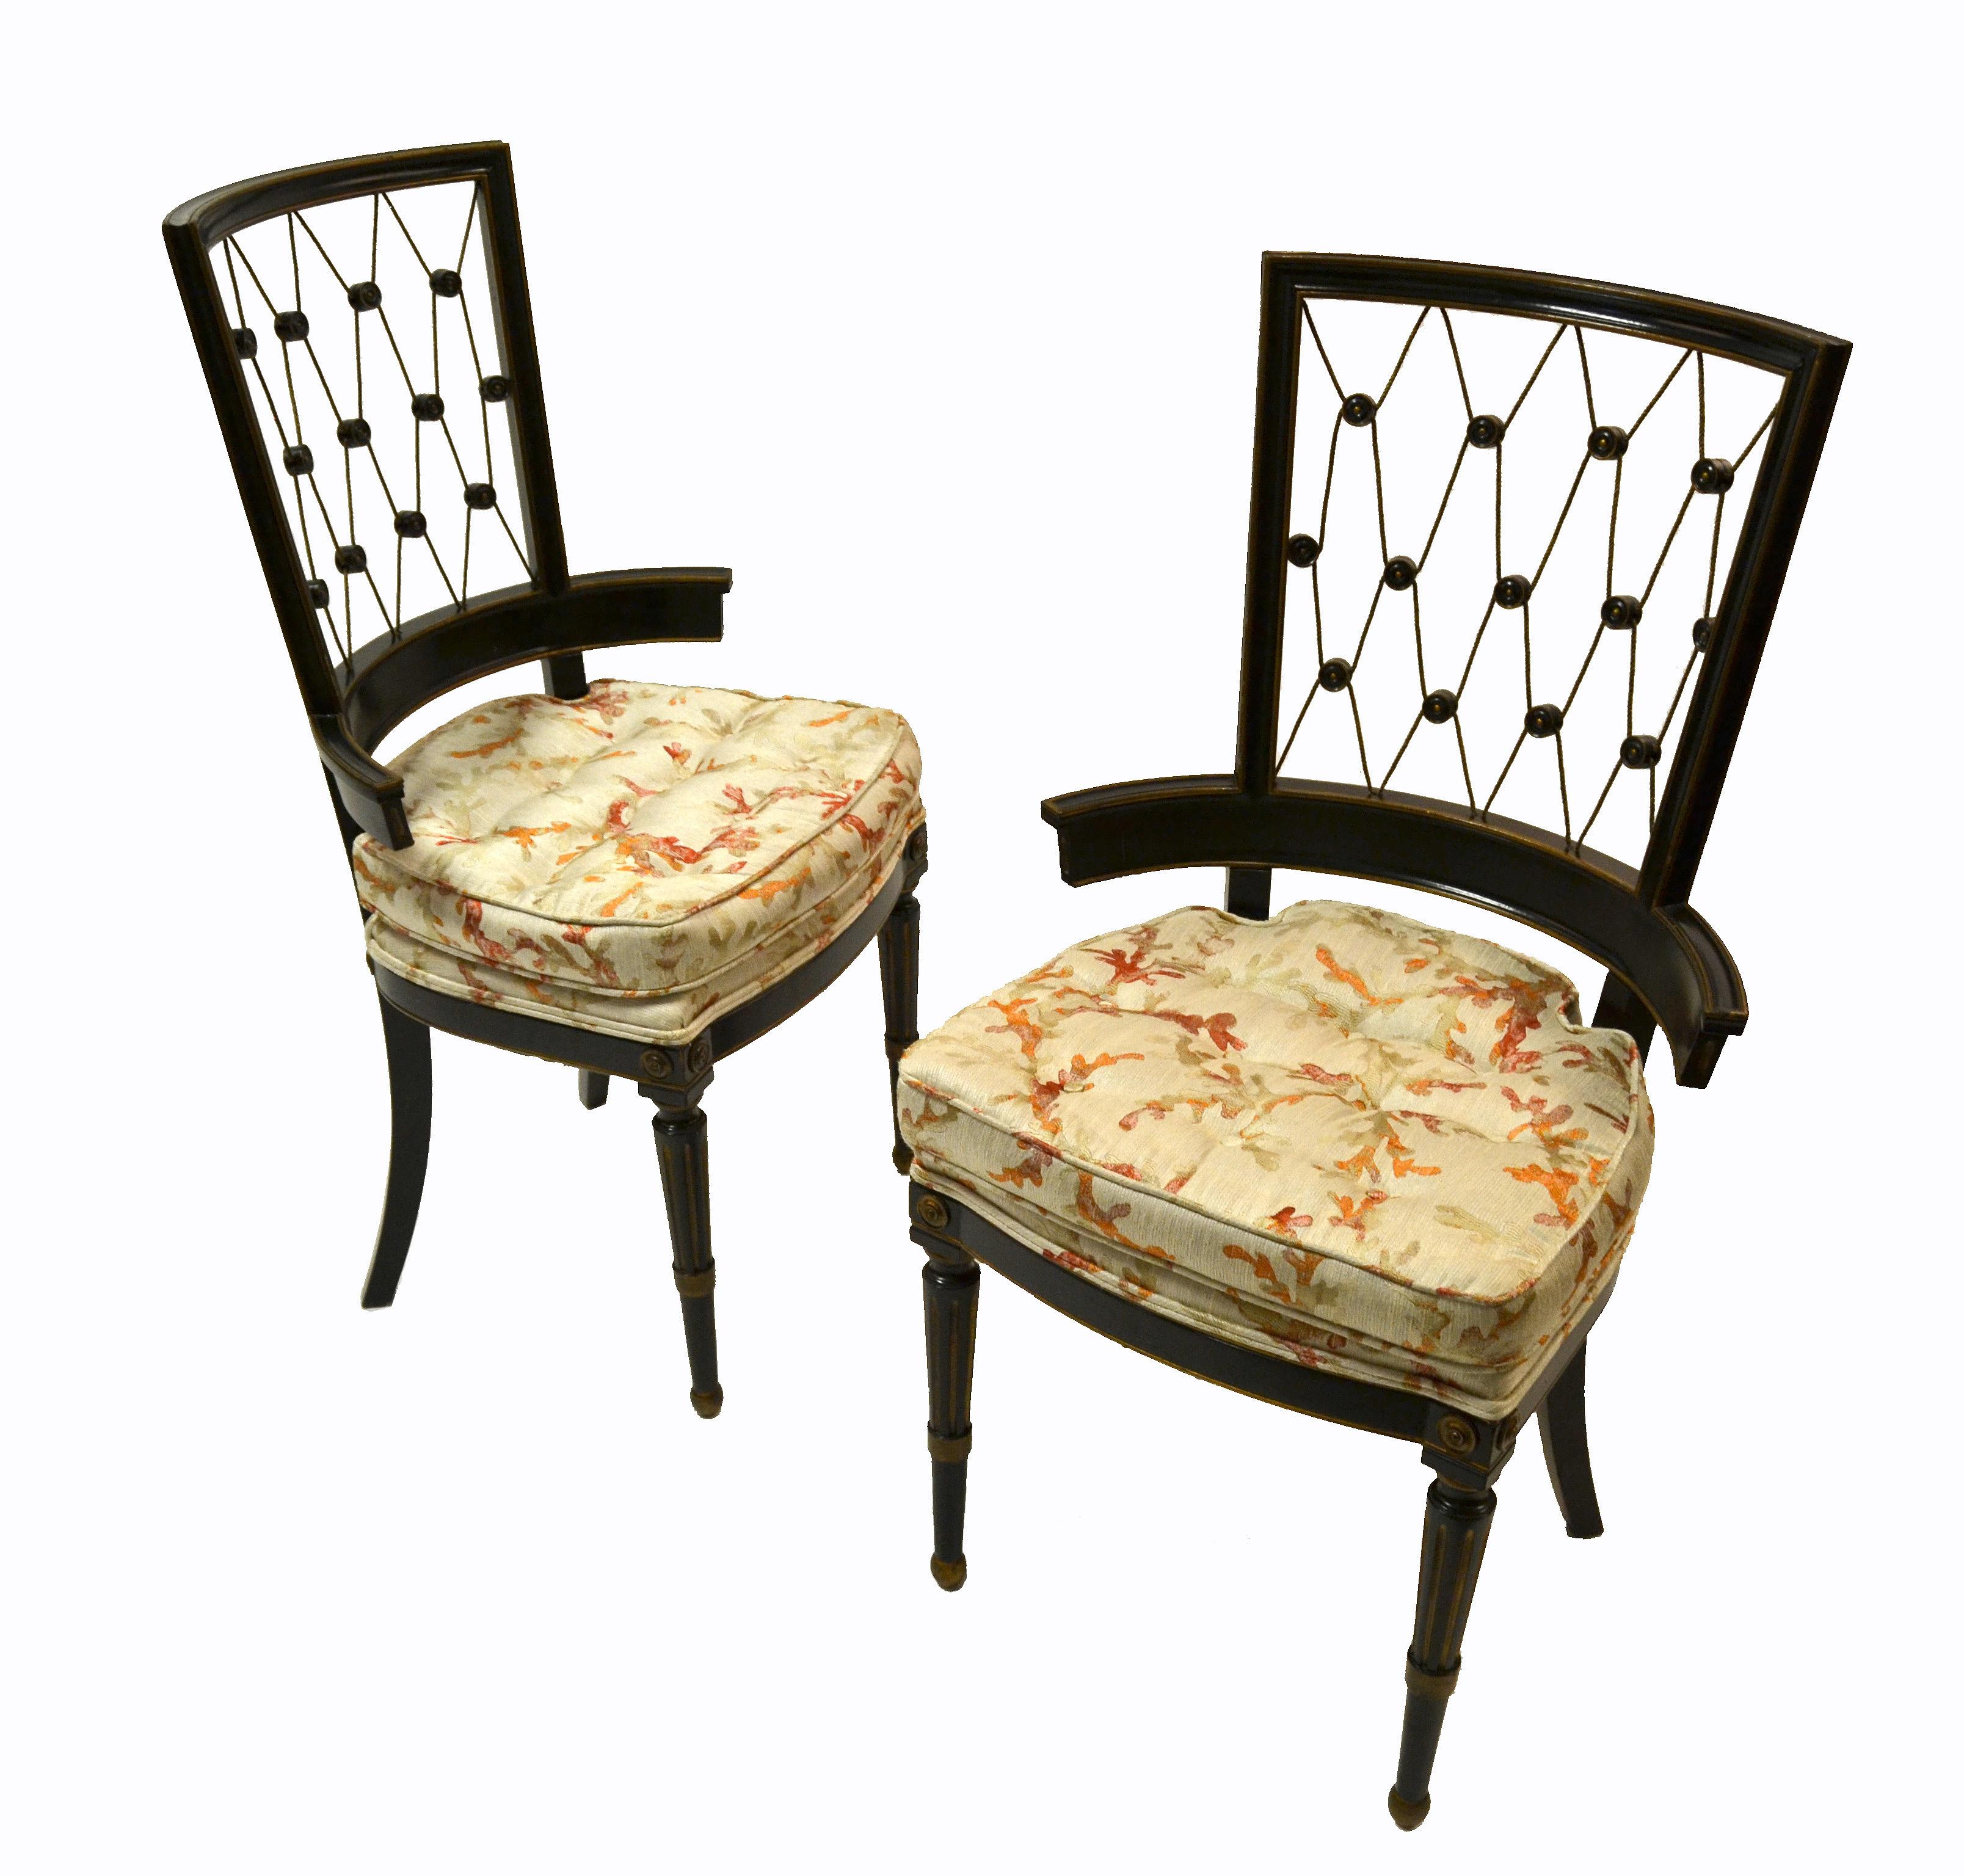 A pair of 1940s American Side Chairs Intricate diamond pattern back armchairs in black and gold.
Very elegant open-vented Back armchairs with feminine curved frame in an ebonized finish with Gold finished details. Tone on tone tufted seating.